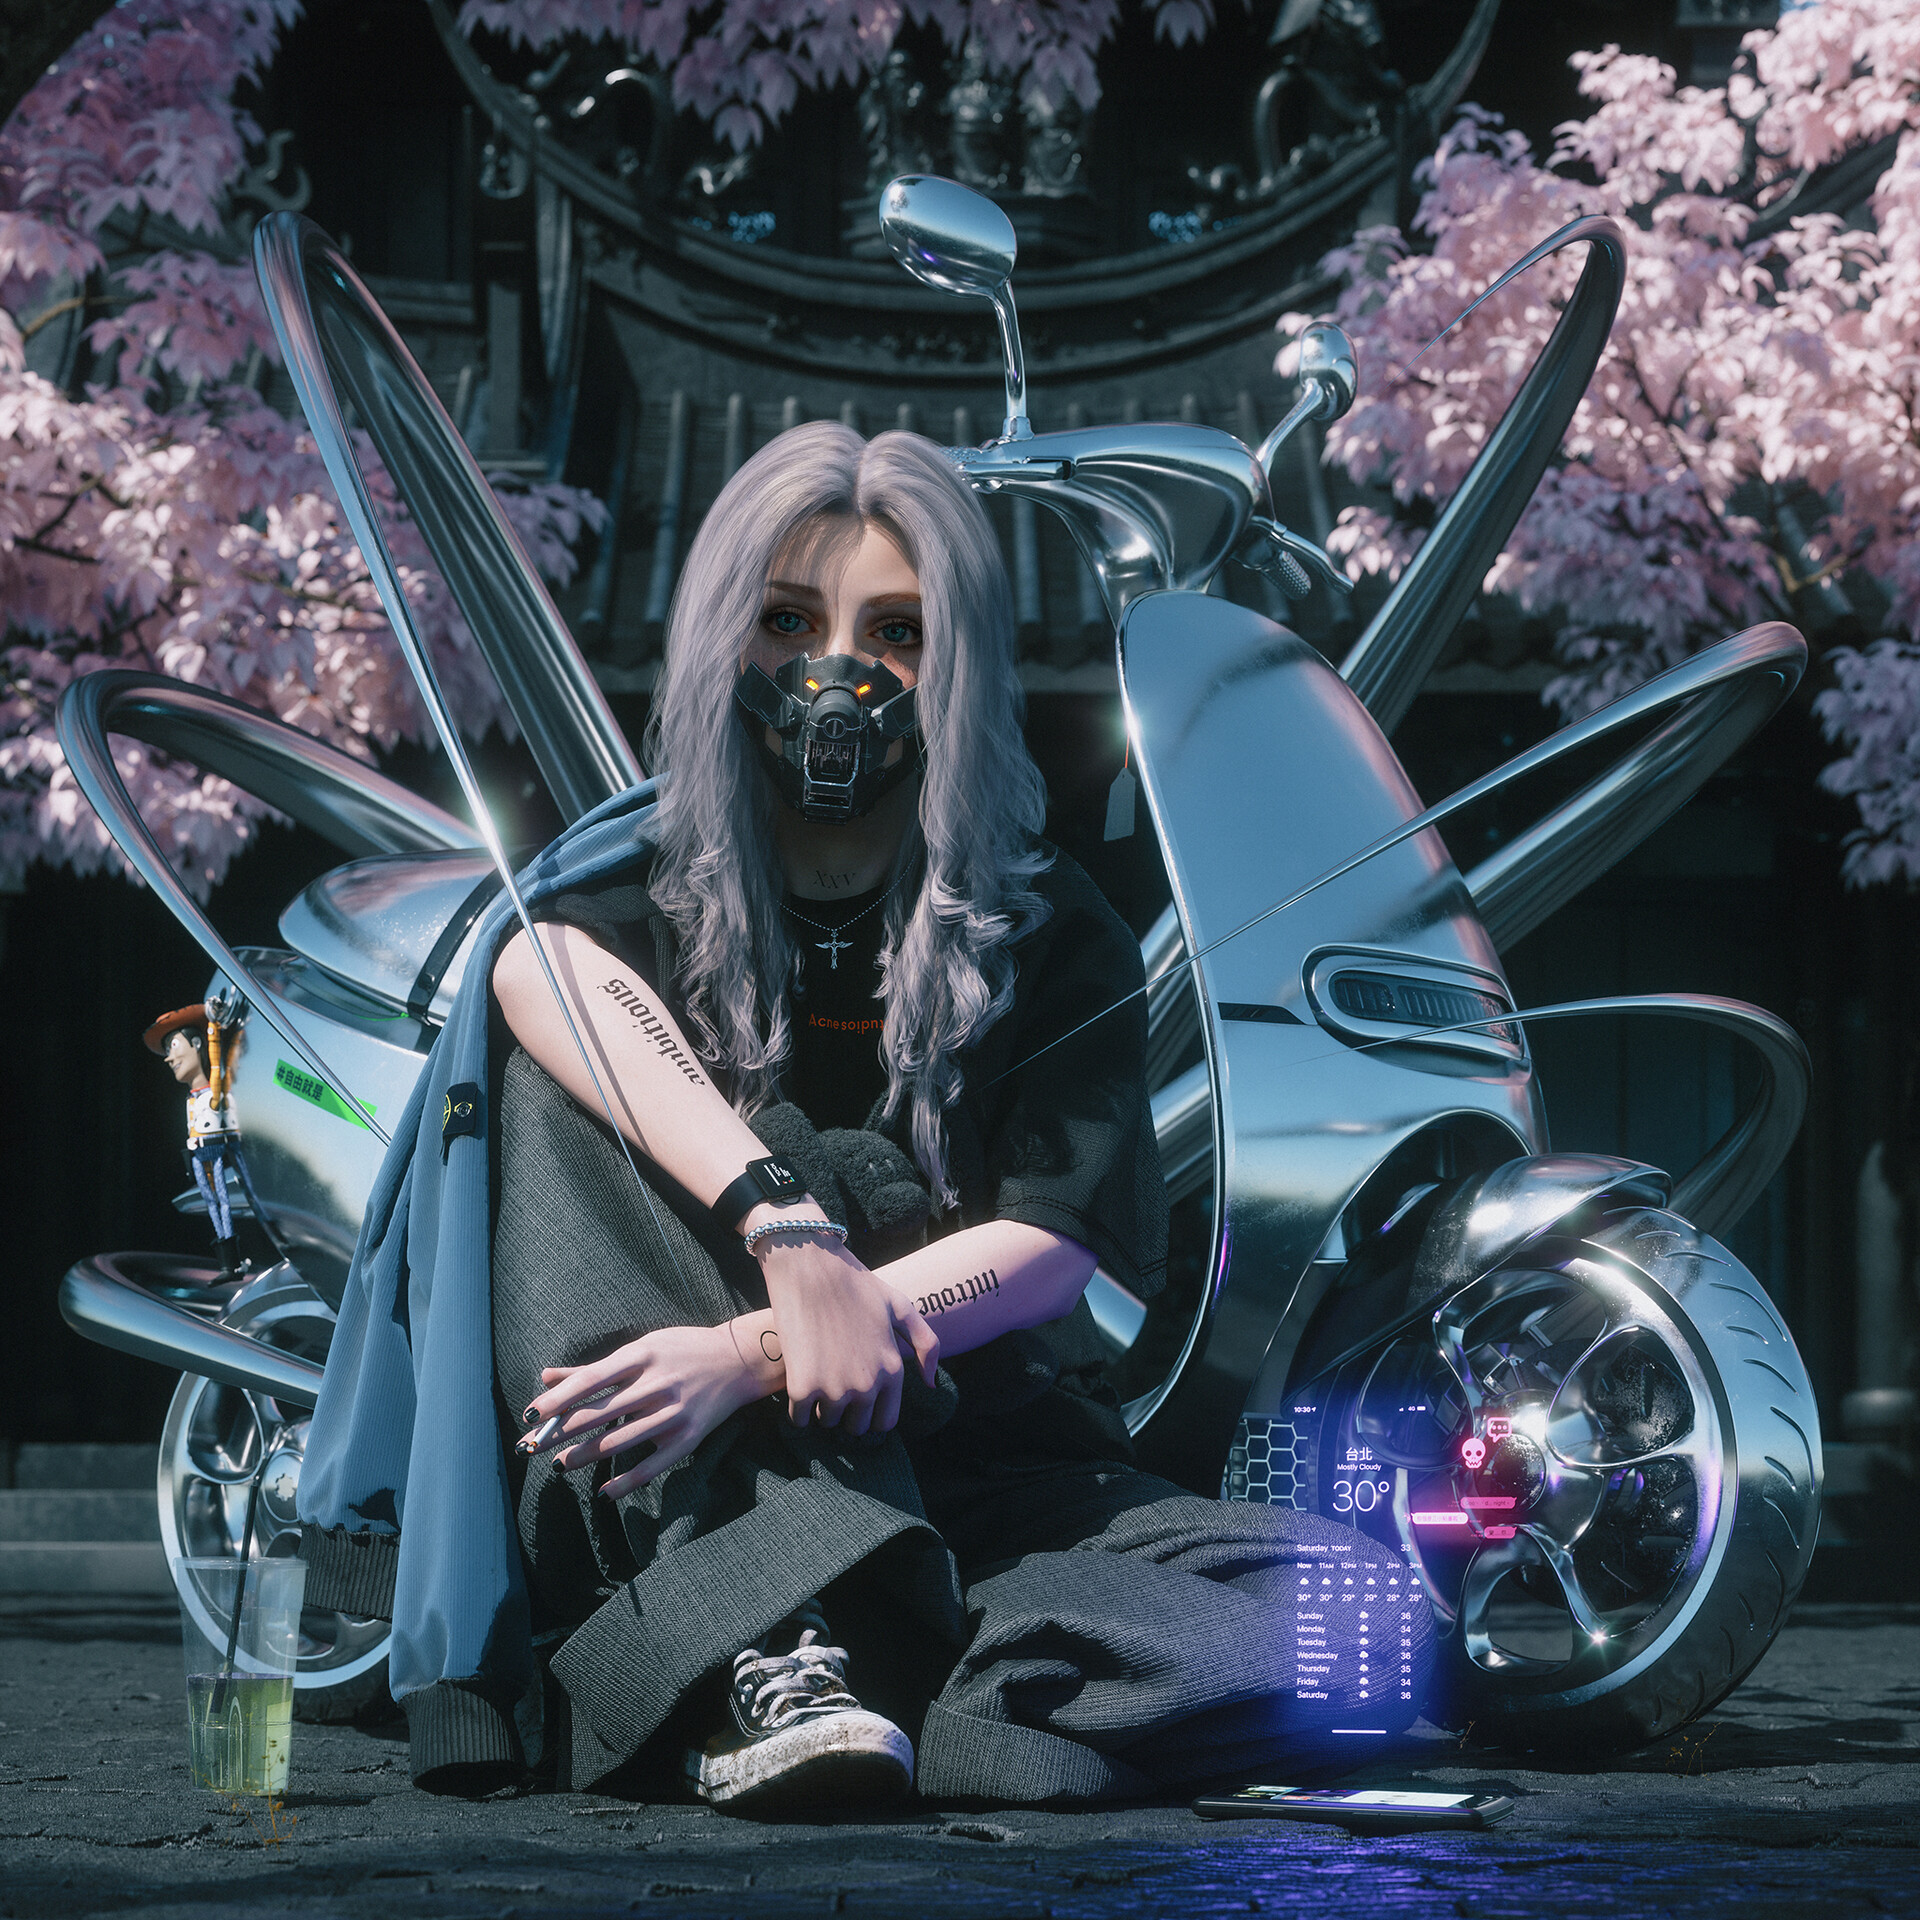 General 1920x1920 women artwork digital art futuristic science fiction women mask vehicle motorcycle women with motorcycles gray hair long hair sitting cigarettes inked girls looking at viewer CGI